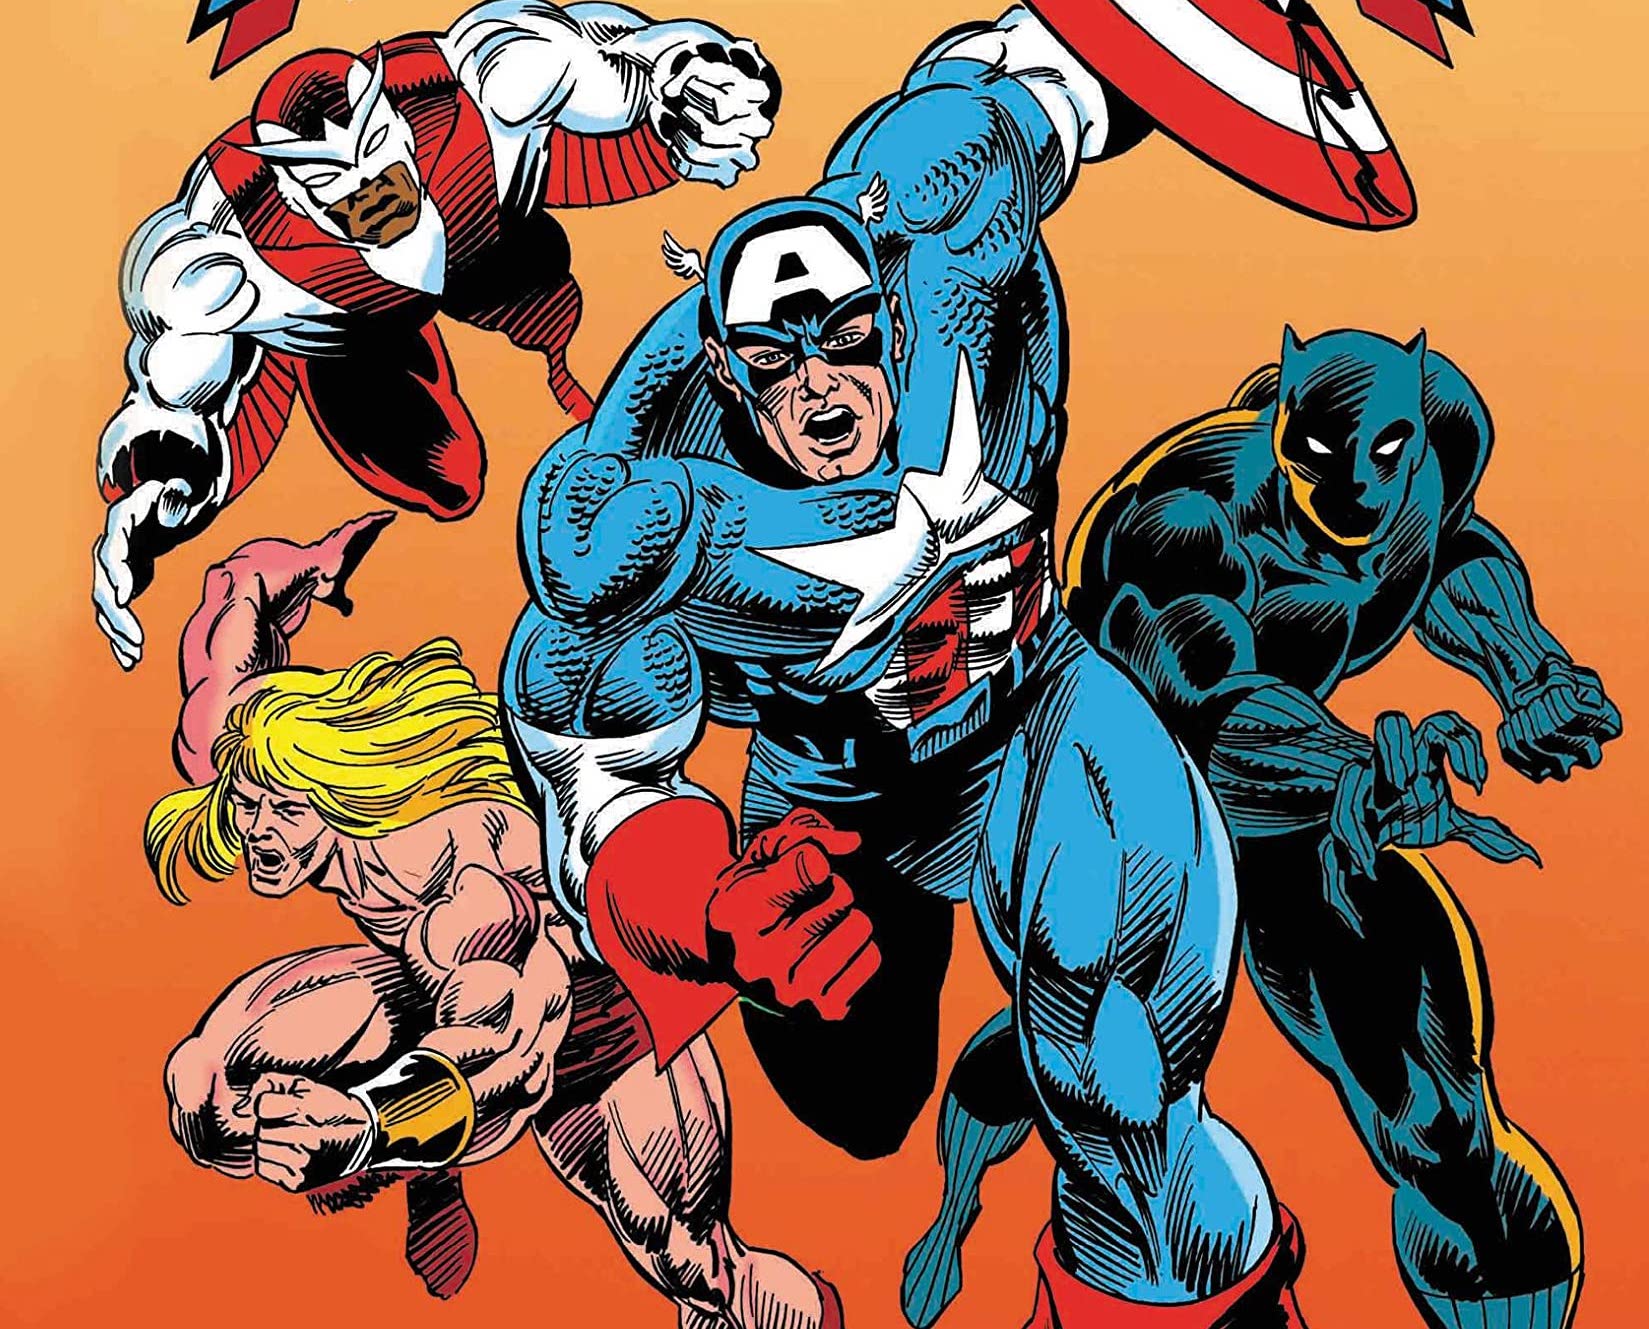 'Captain America Epic Collection: Arena of Death' shows Mark Gruenwald play with his toys, but doesn't go anywhere